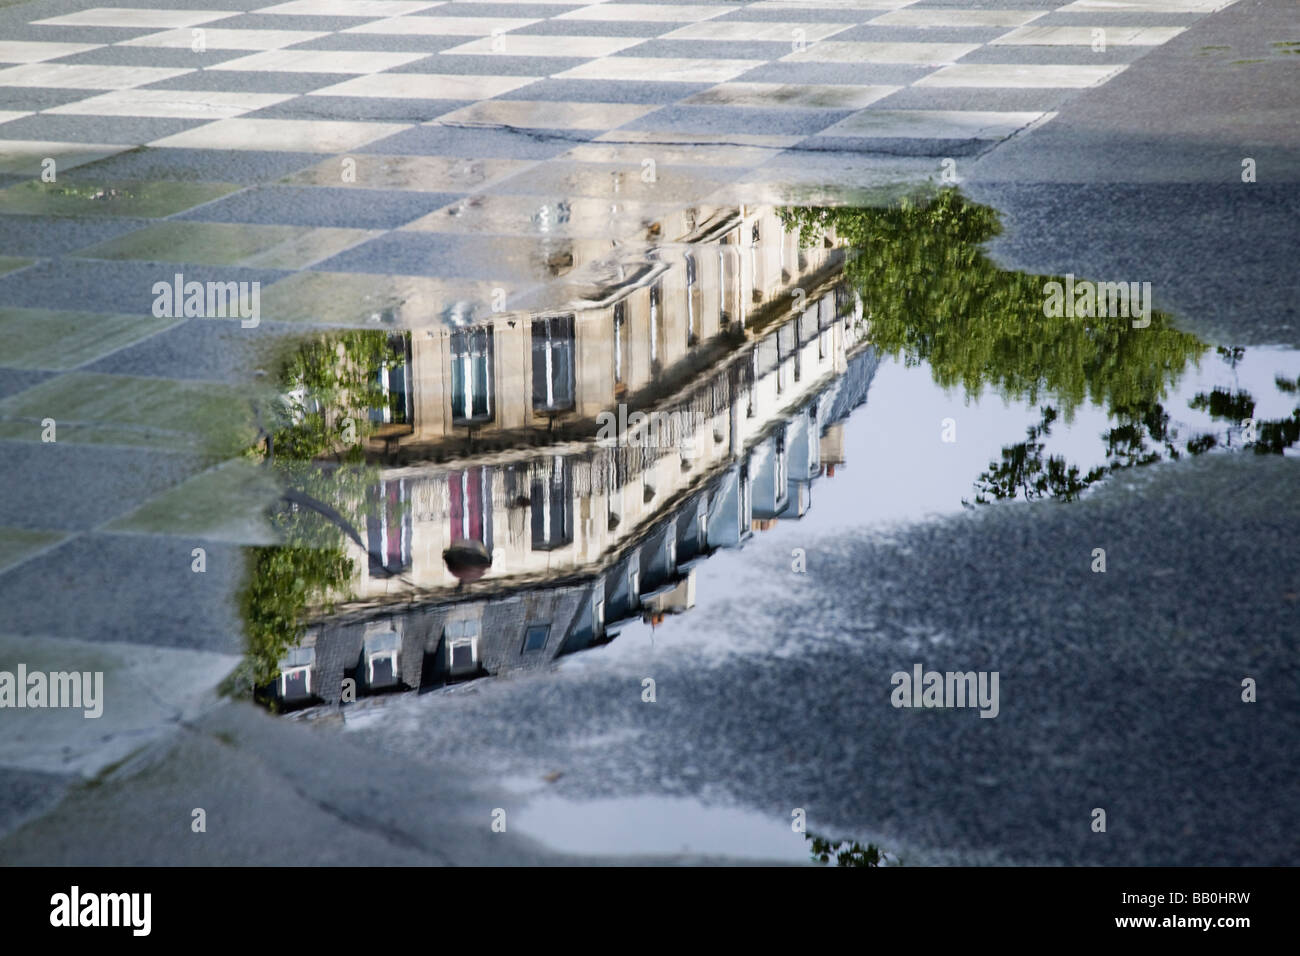 Reflection of building in puddle, Boulevard St Germain France Paris Stock Photo